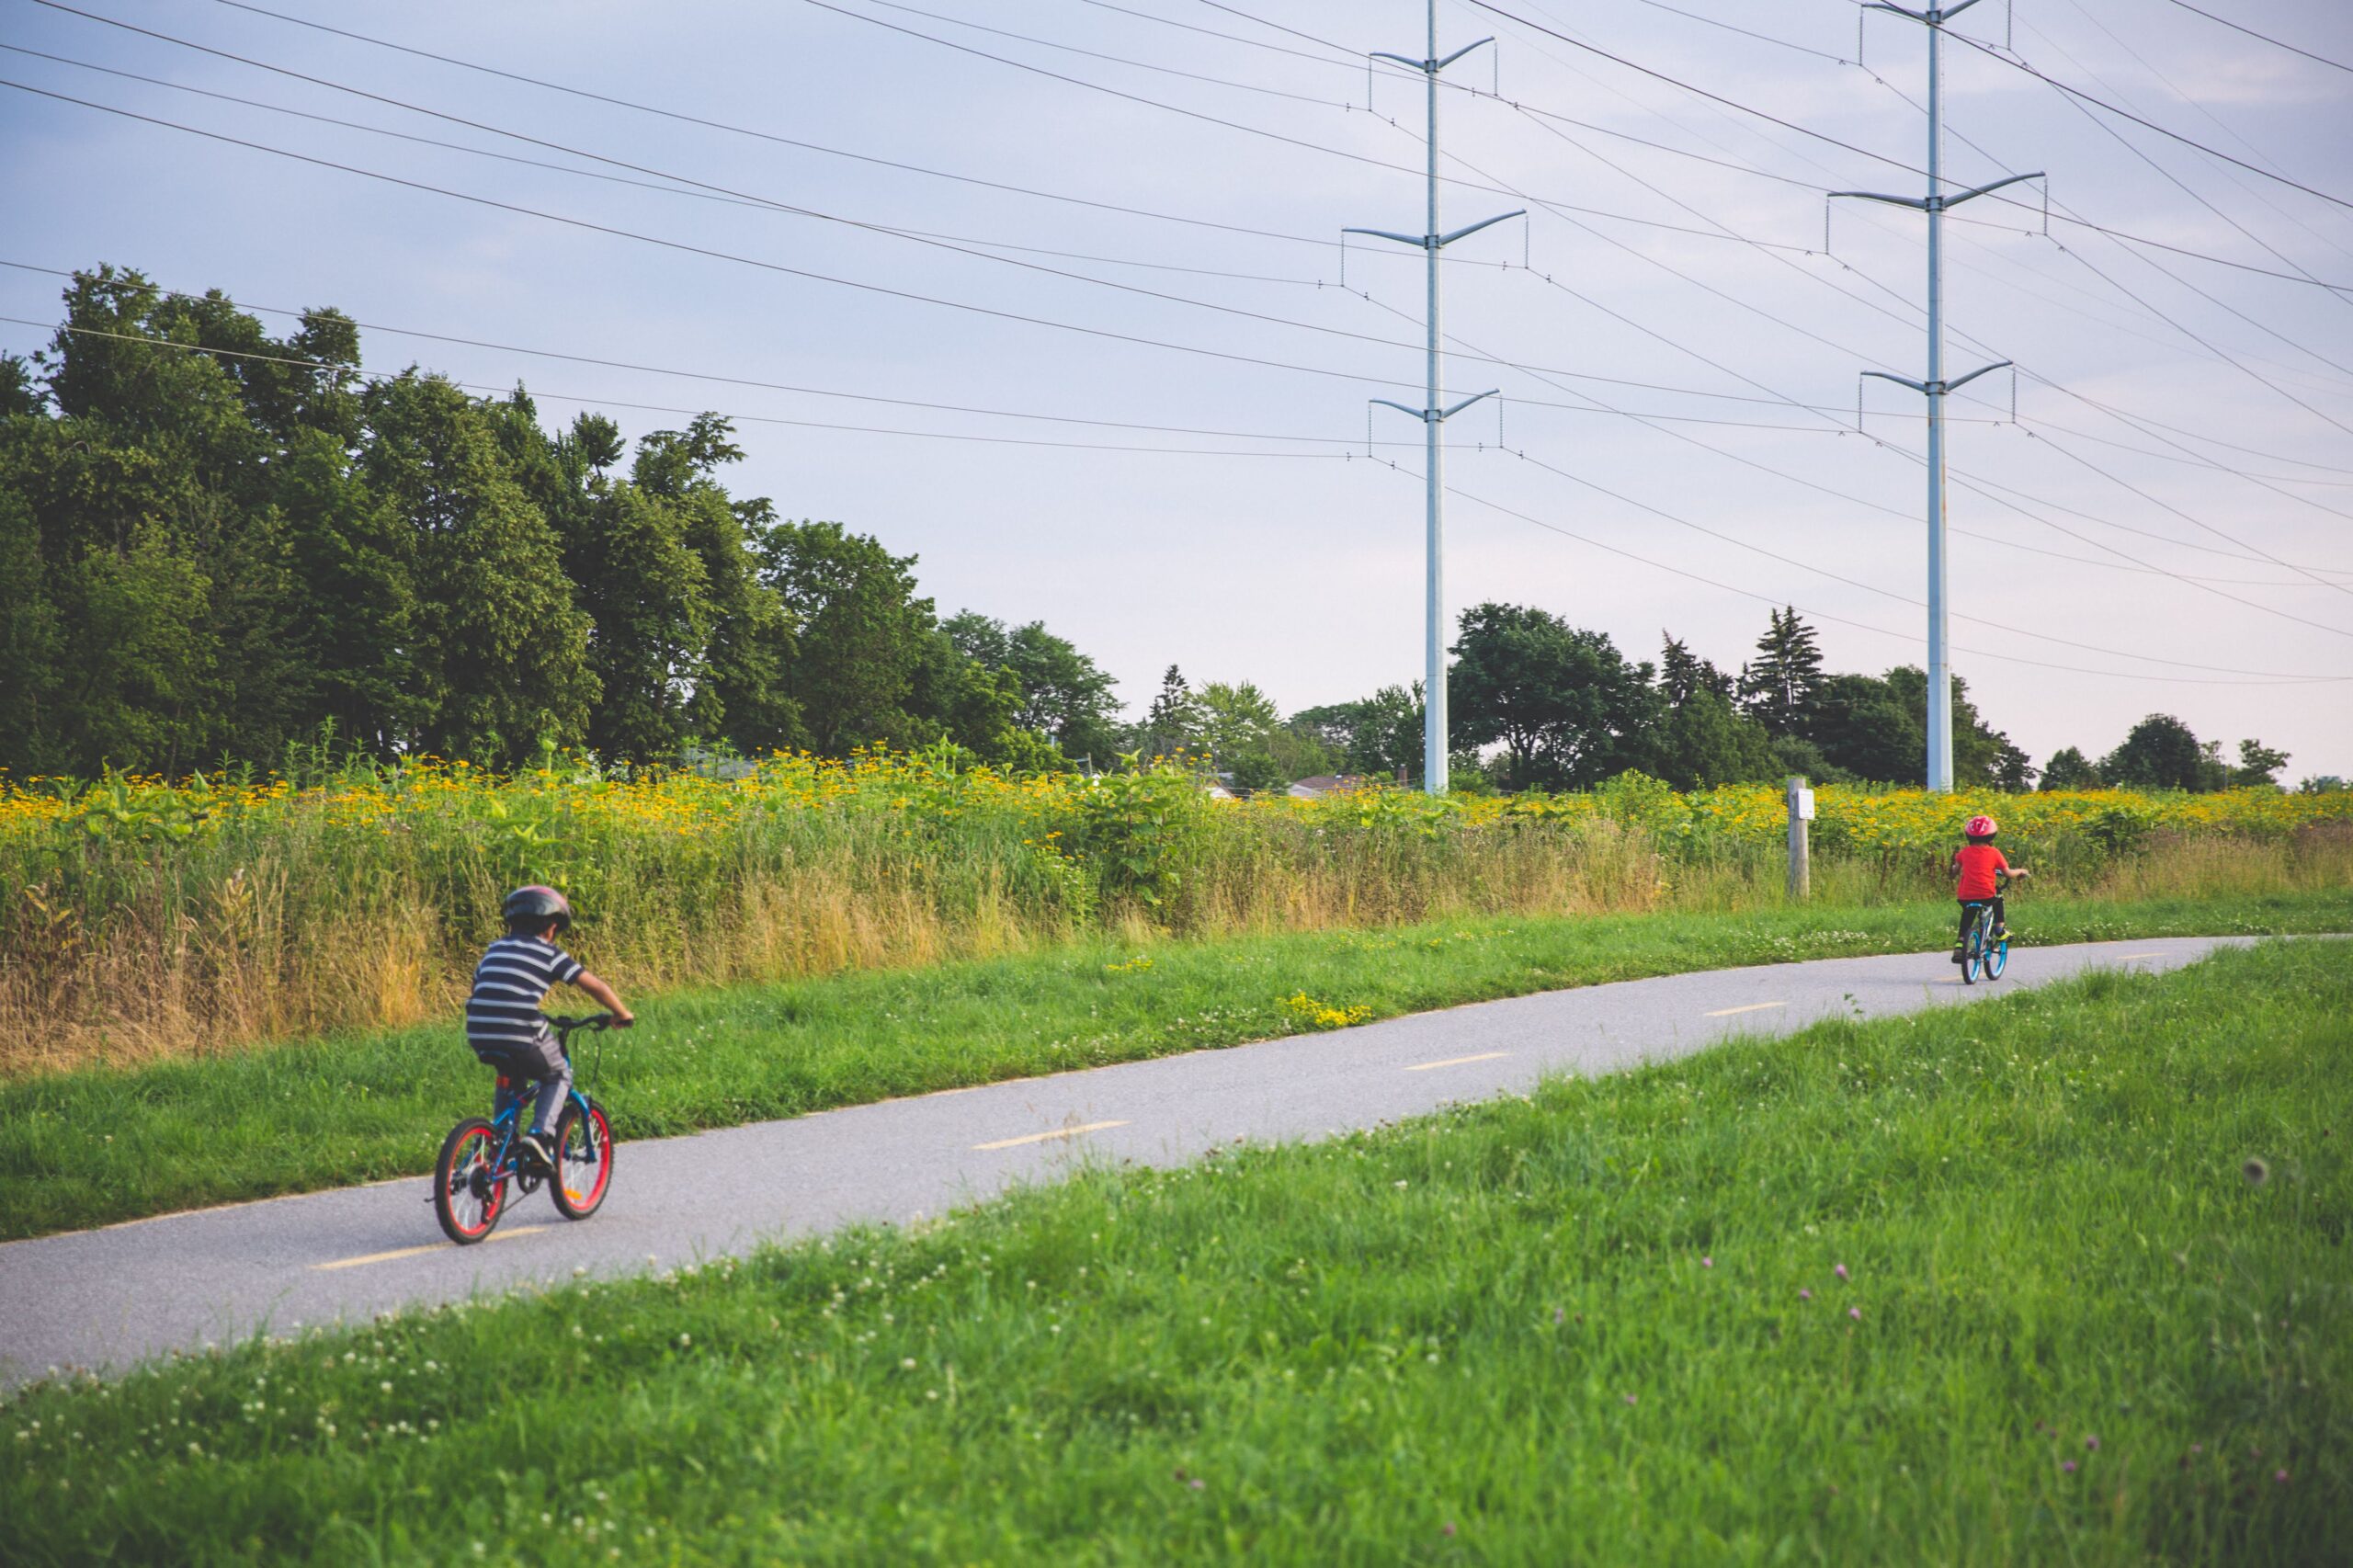 Two children cycling on a bike path